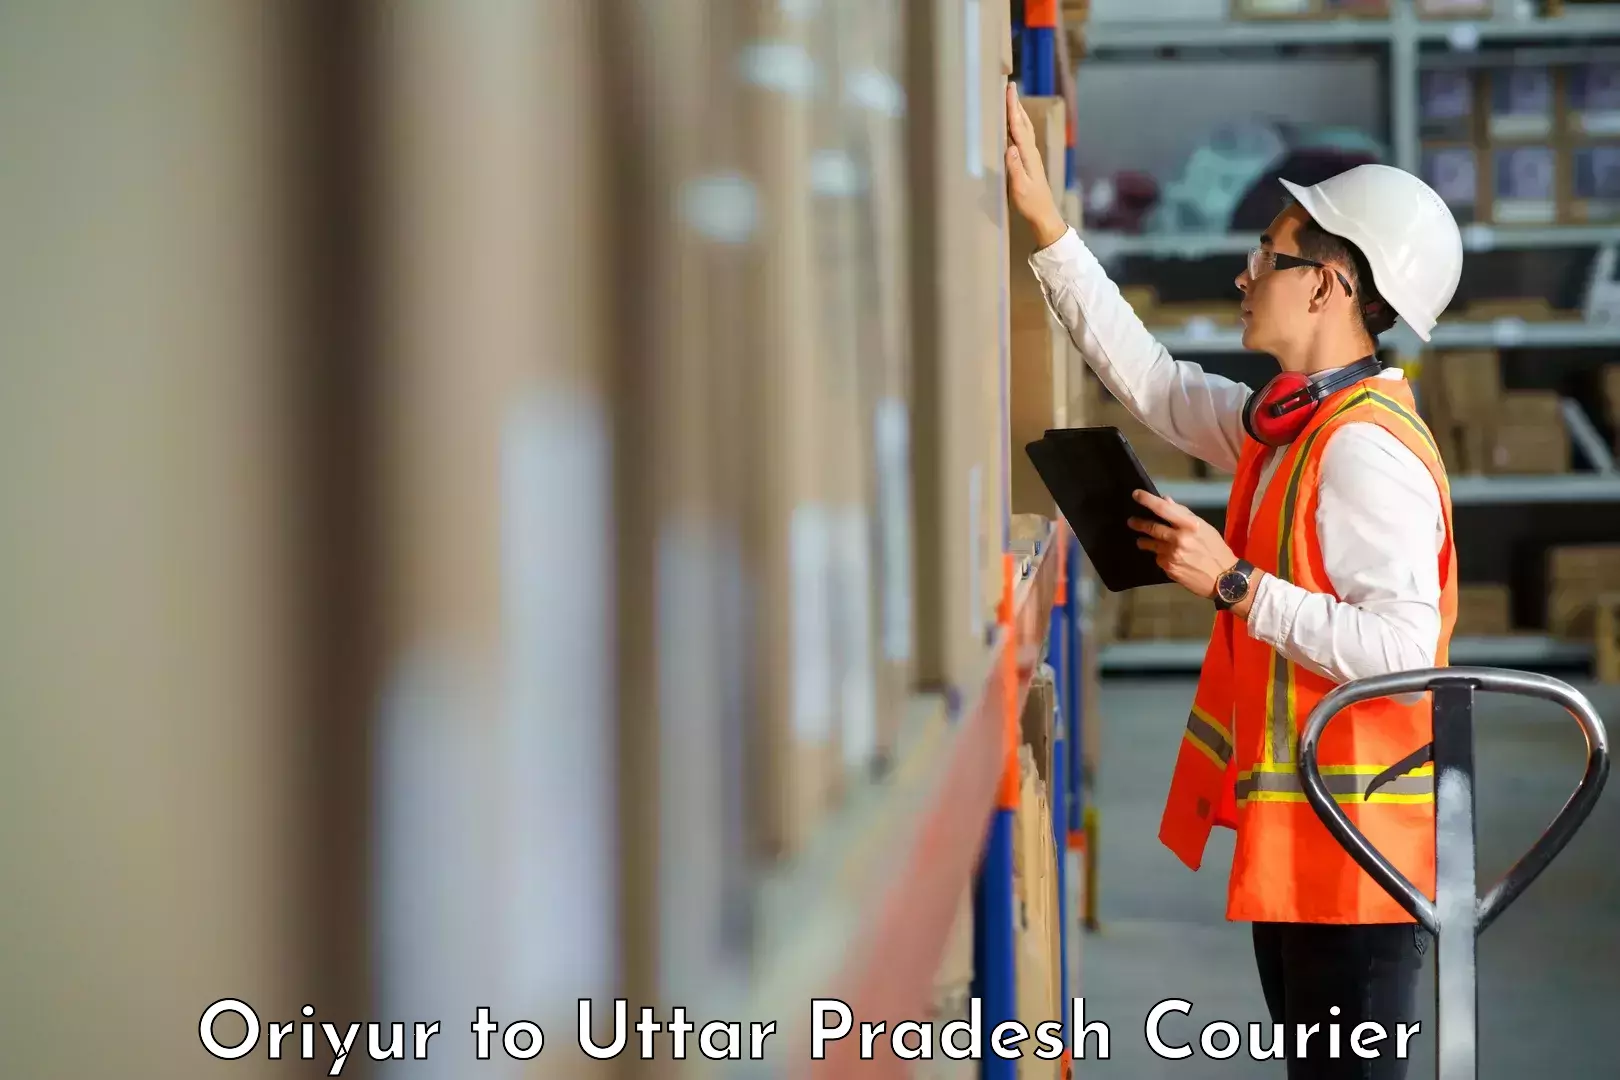 Courier service efficiency in Oriyur to Sirathu